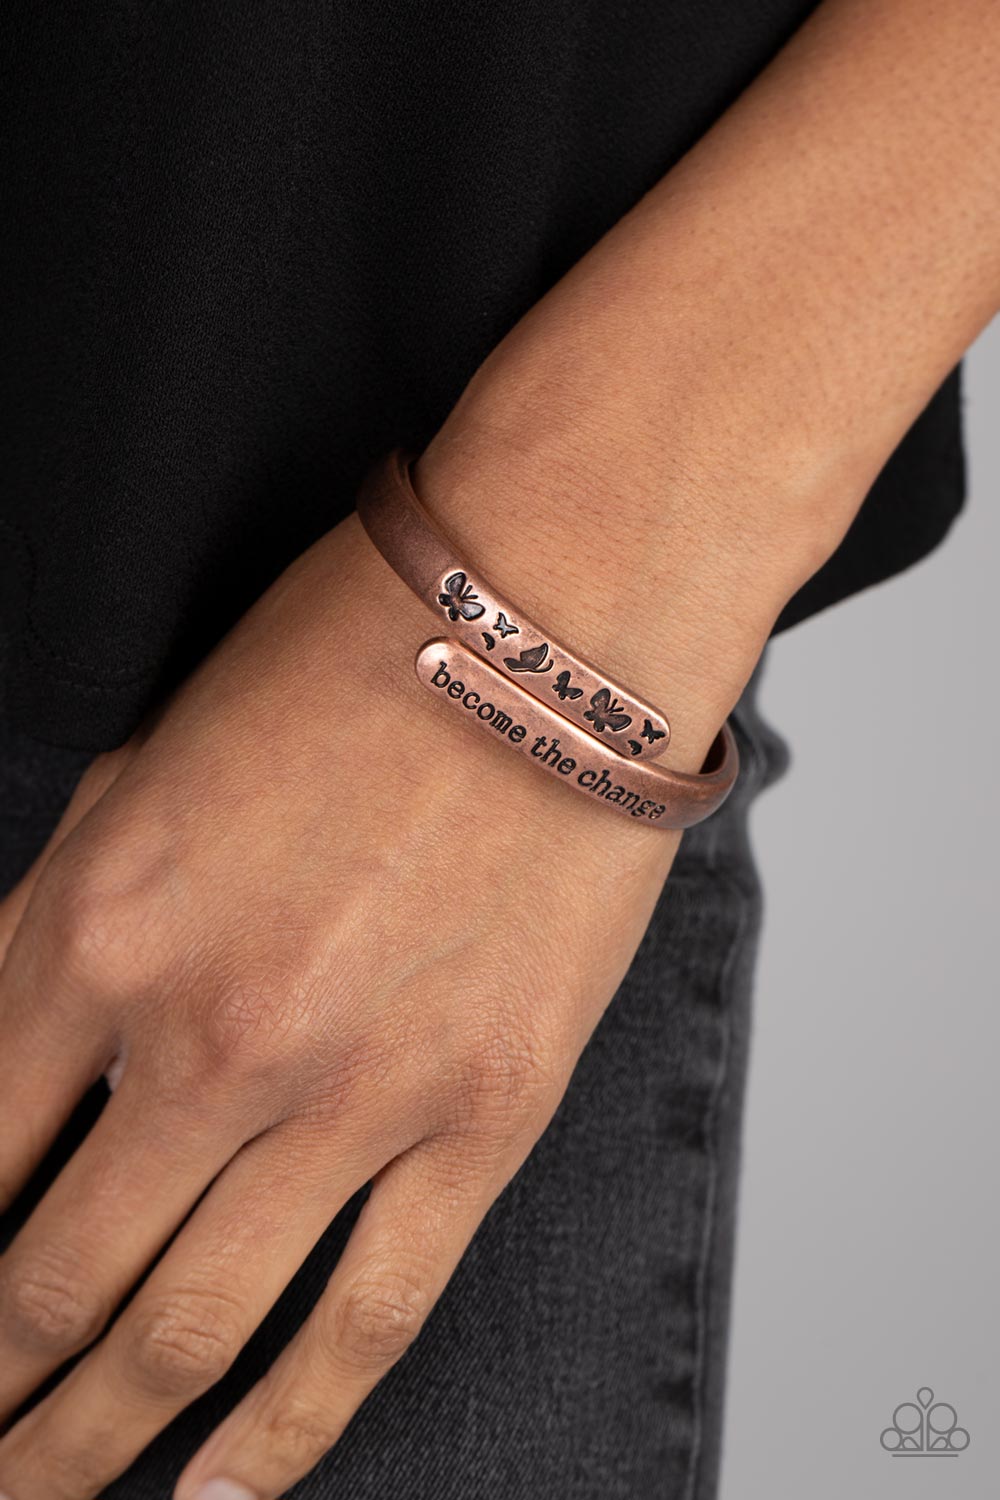 WINGS of Change - Copper Antiqued "become the change" Stamped Paparazzi Hinge Bracelet